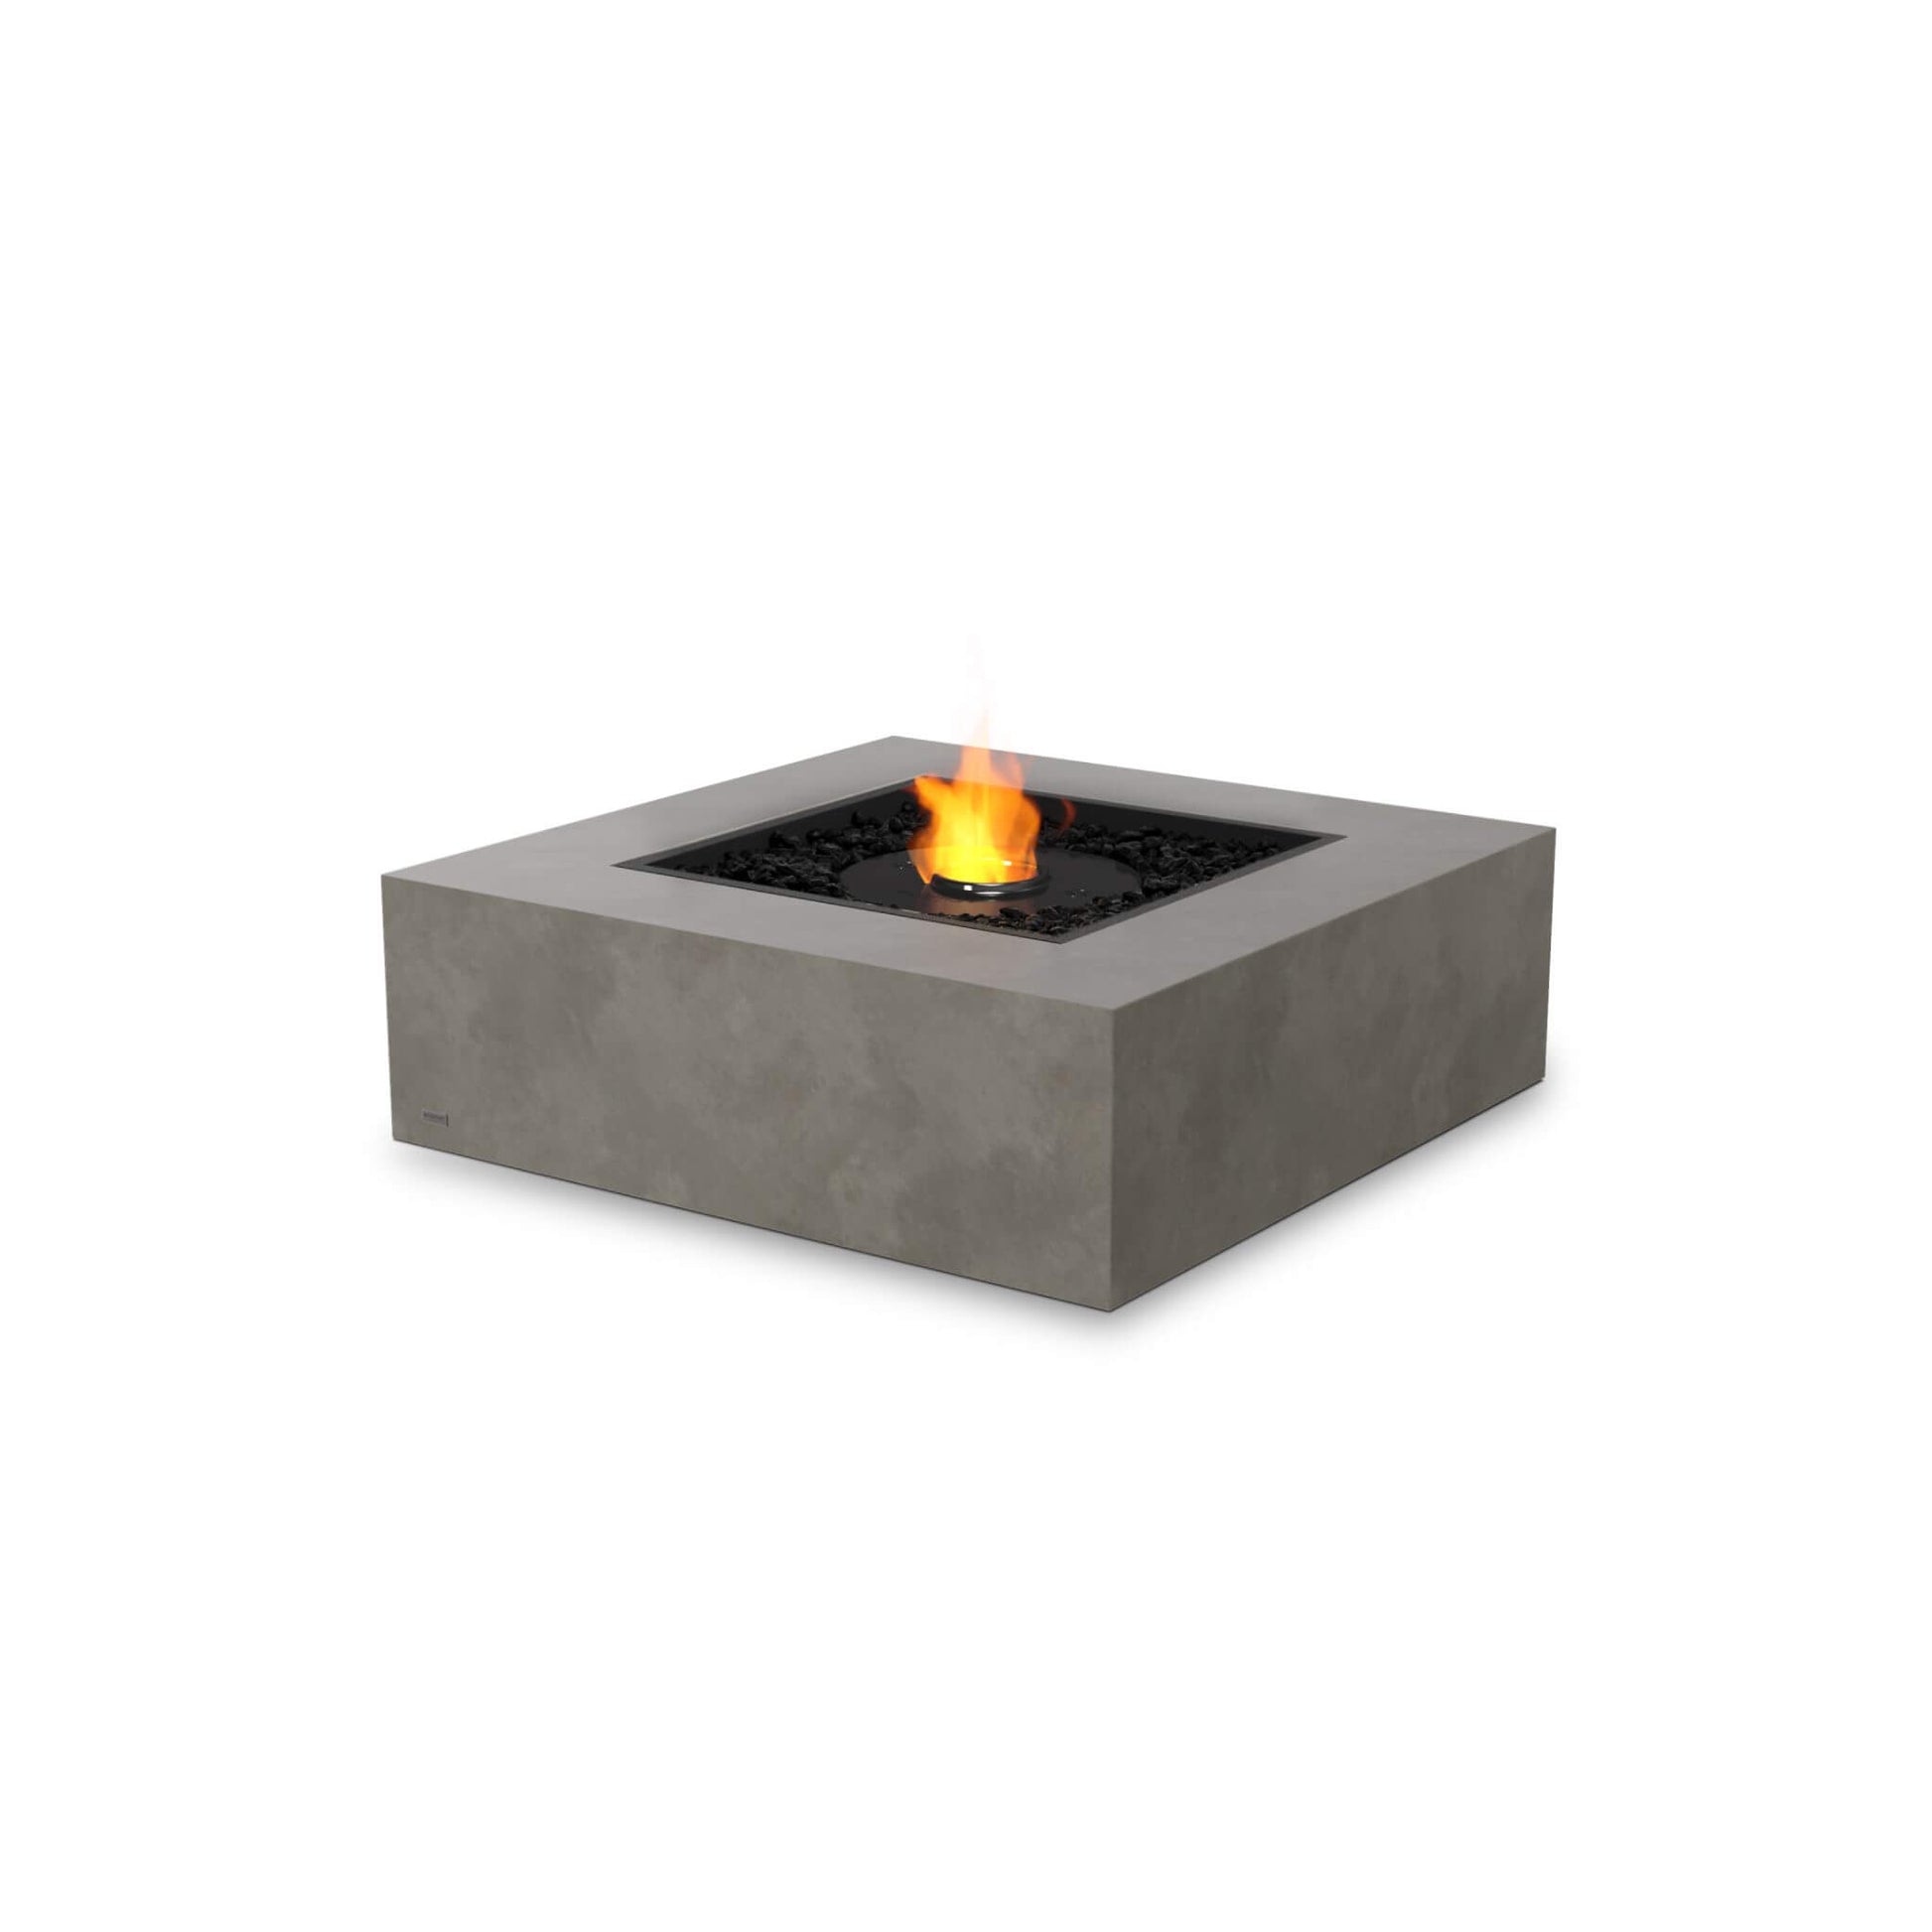 Base 40 Square Concrete Bio Ethanol Fire Pit Coffee Table in Natural (grey) with black burner for Indoor & Outdoor Heating by Ecosmart Fire